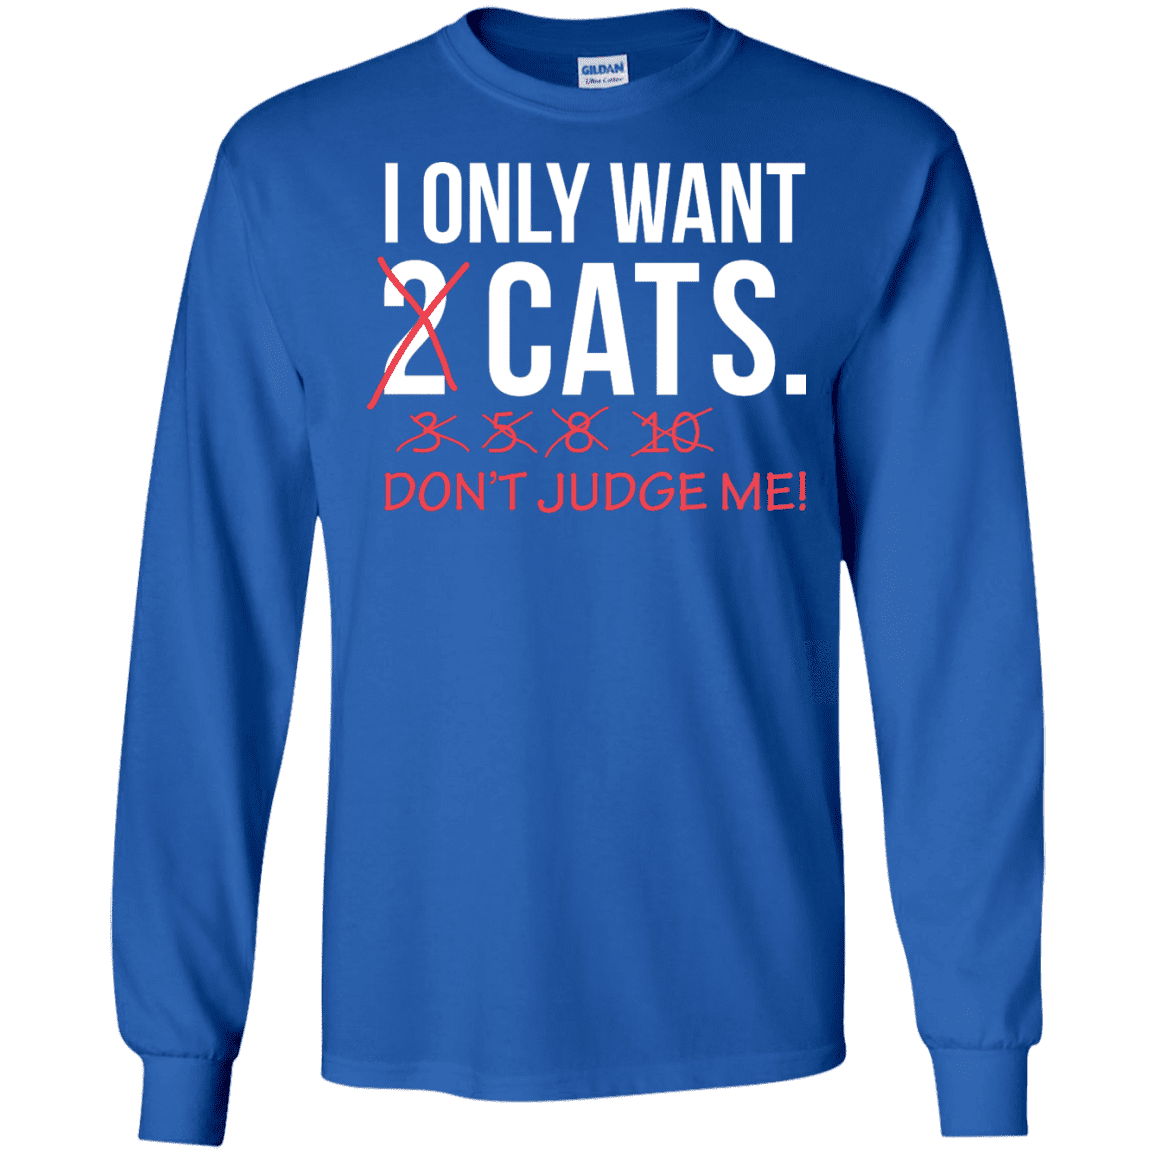 Only Want Cats - Long Sleeve T Shirt.